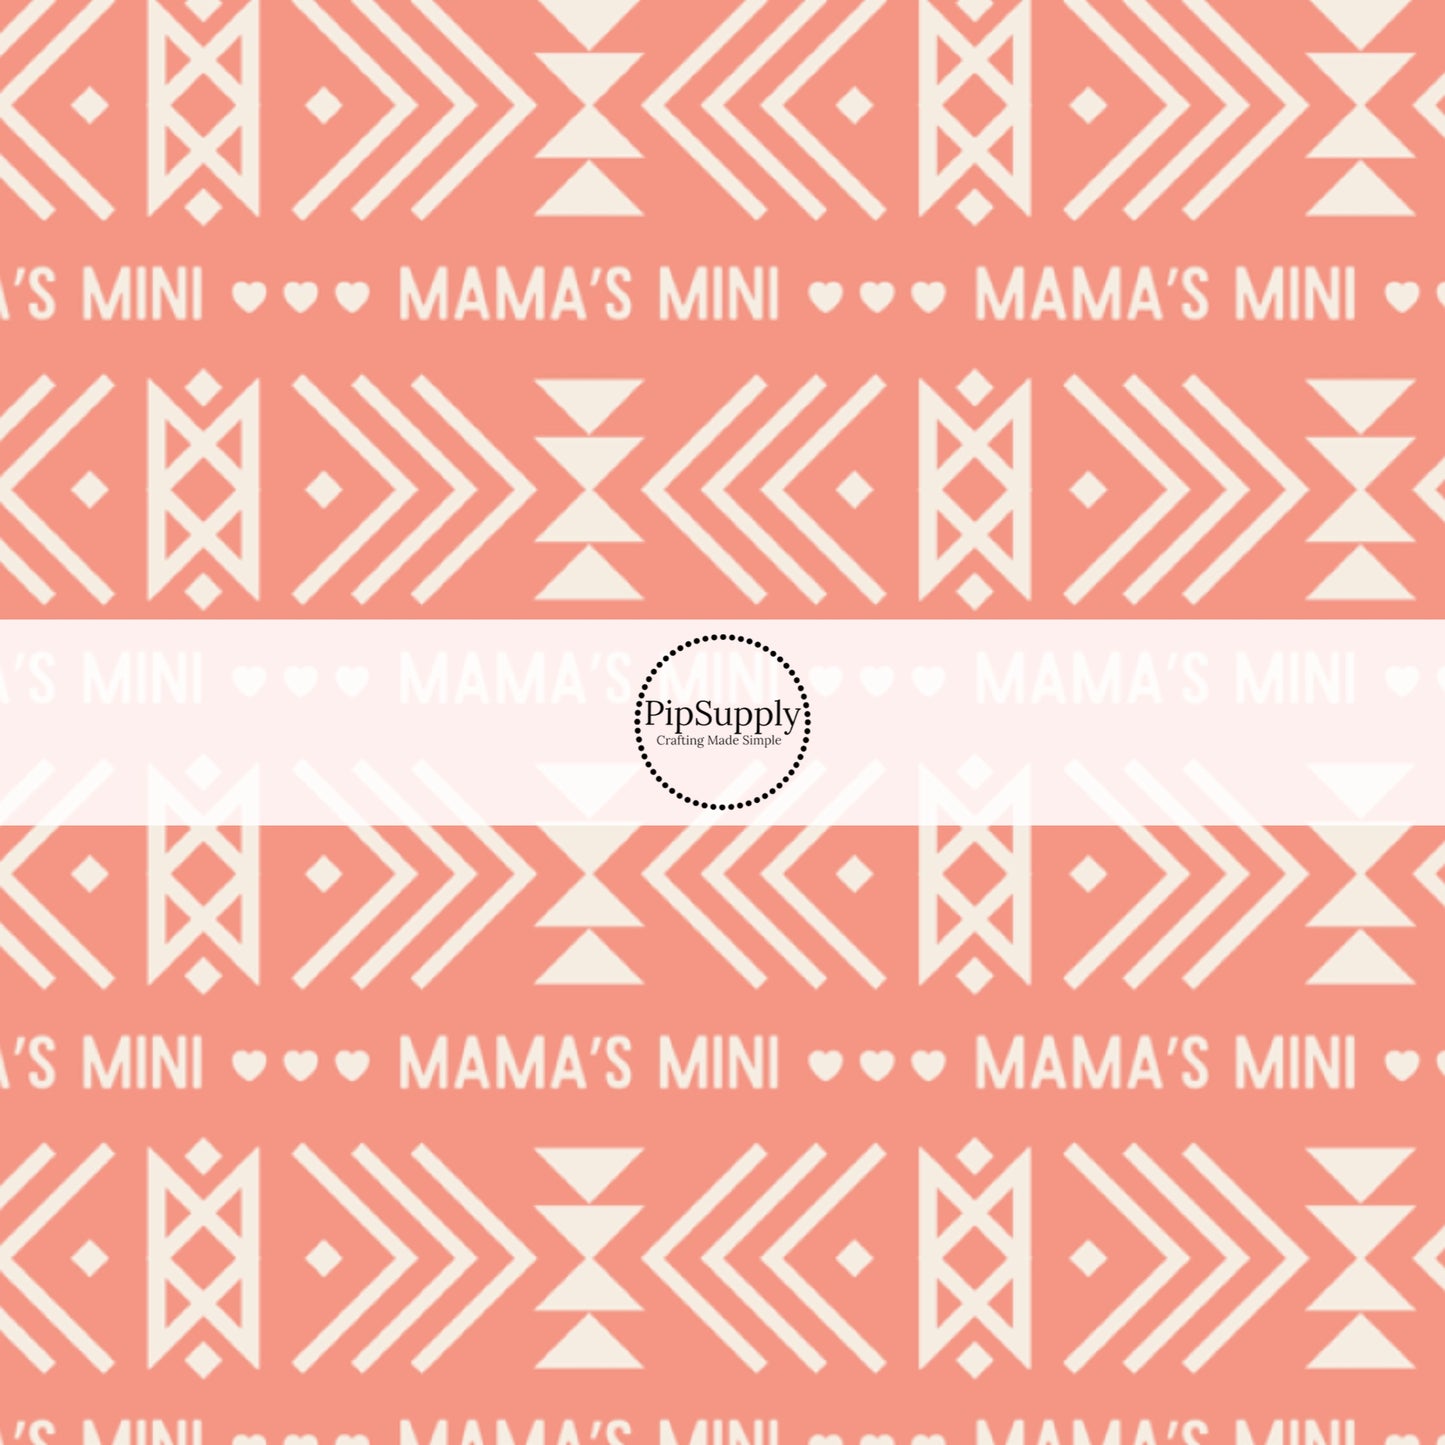 "Mama's Mini" Aztec Print on Coral Fabric by the Yard.